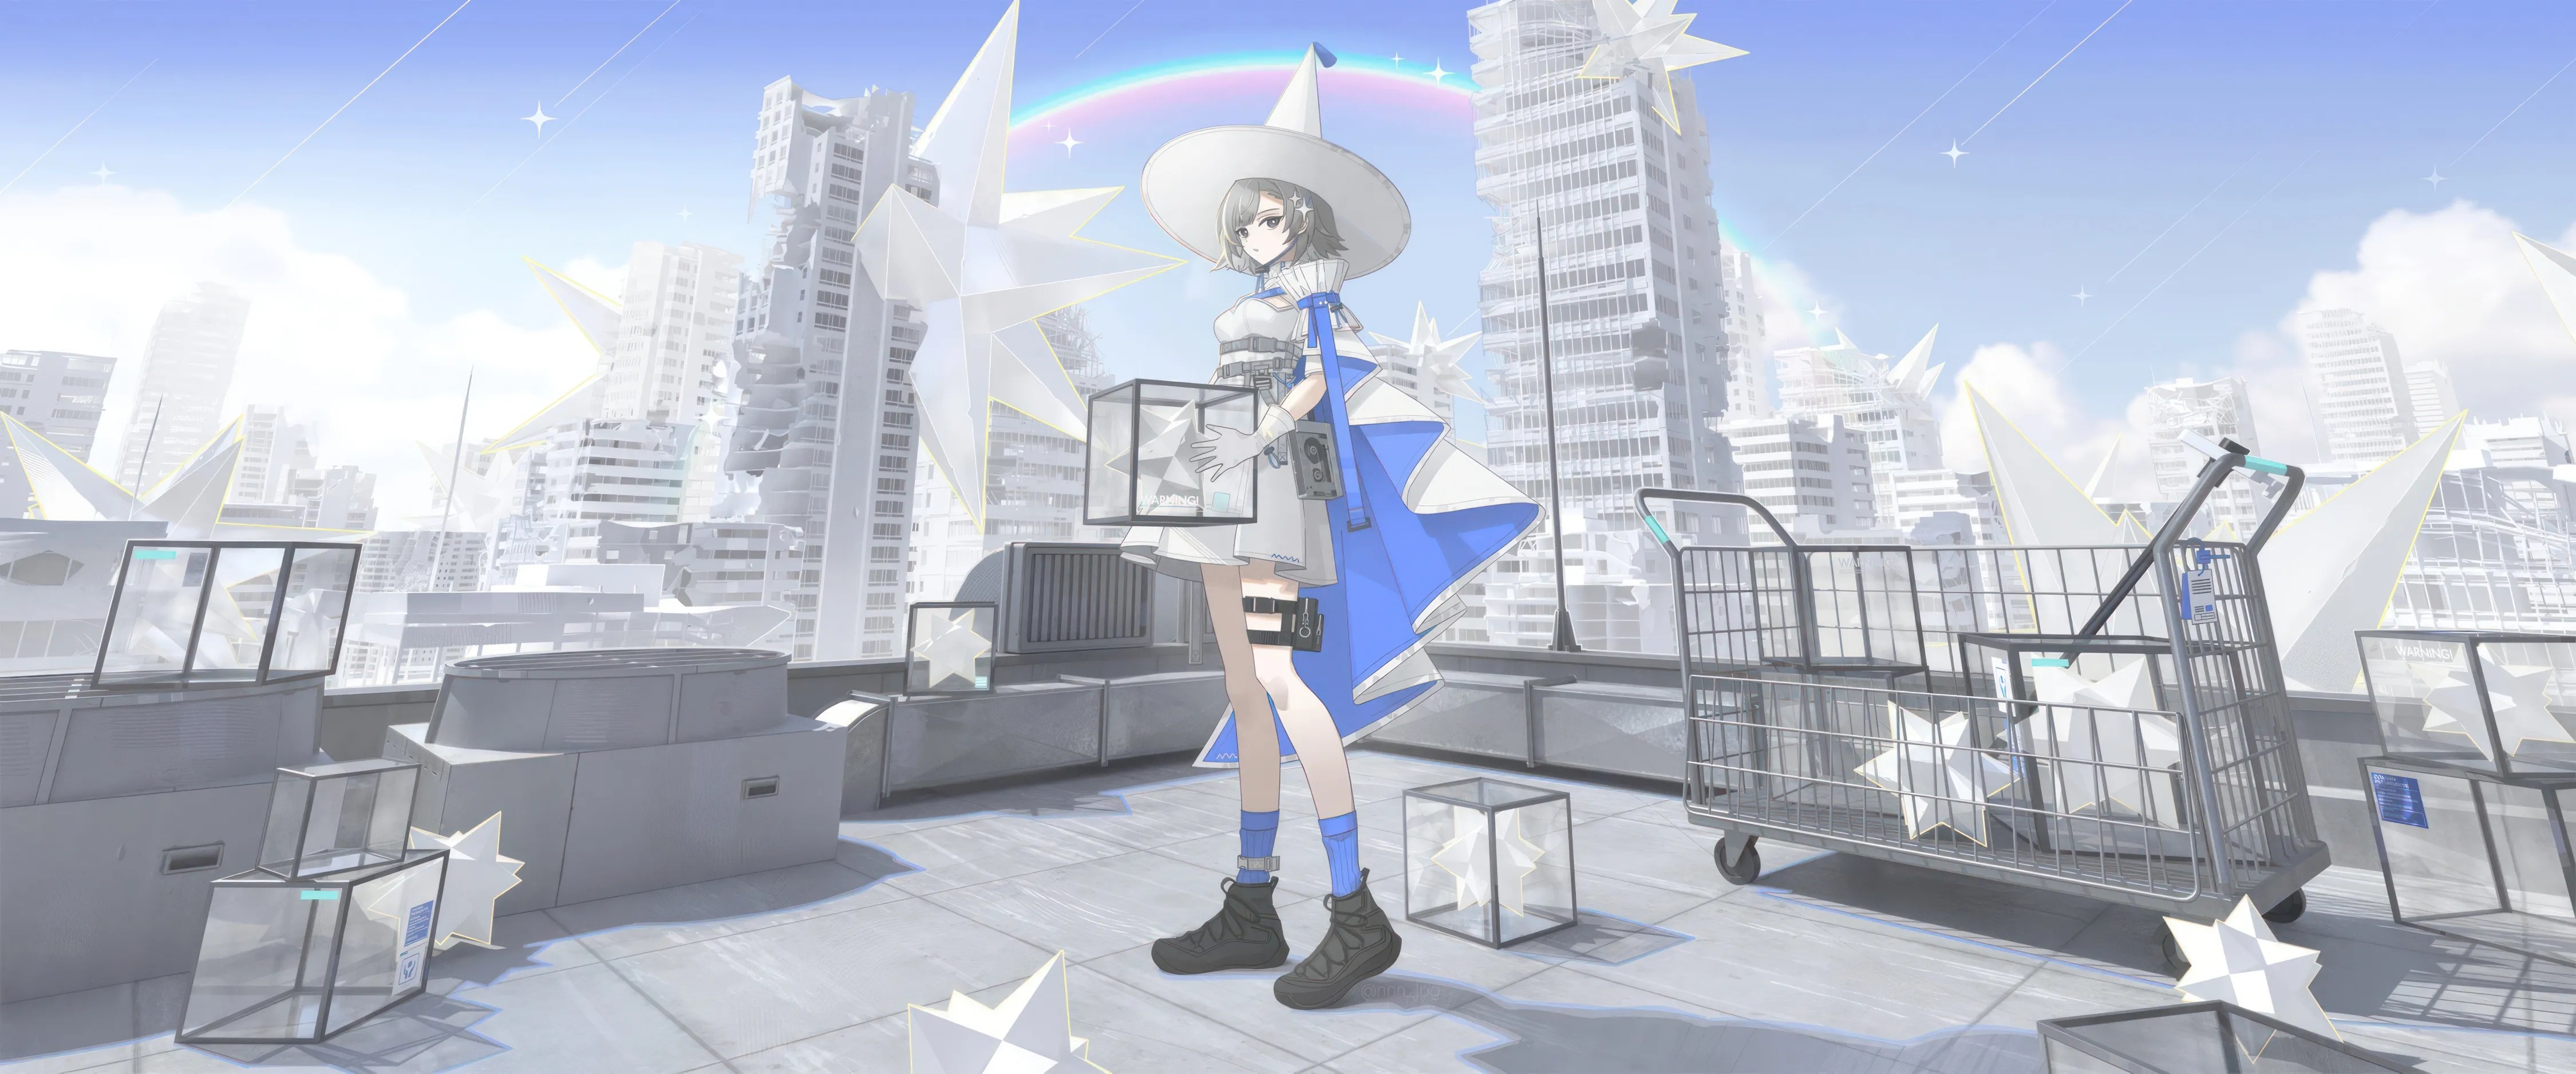 Anime 4500x1876 anime girls anime city cape hat feather dress rooftops